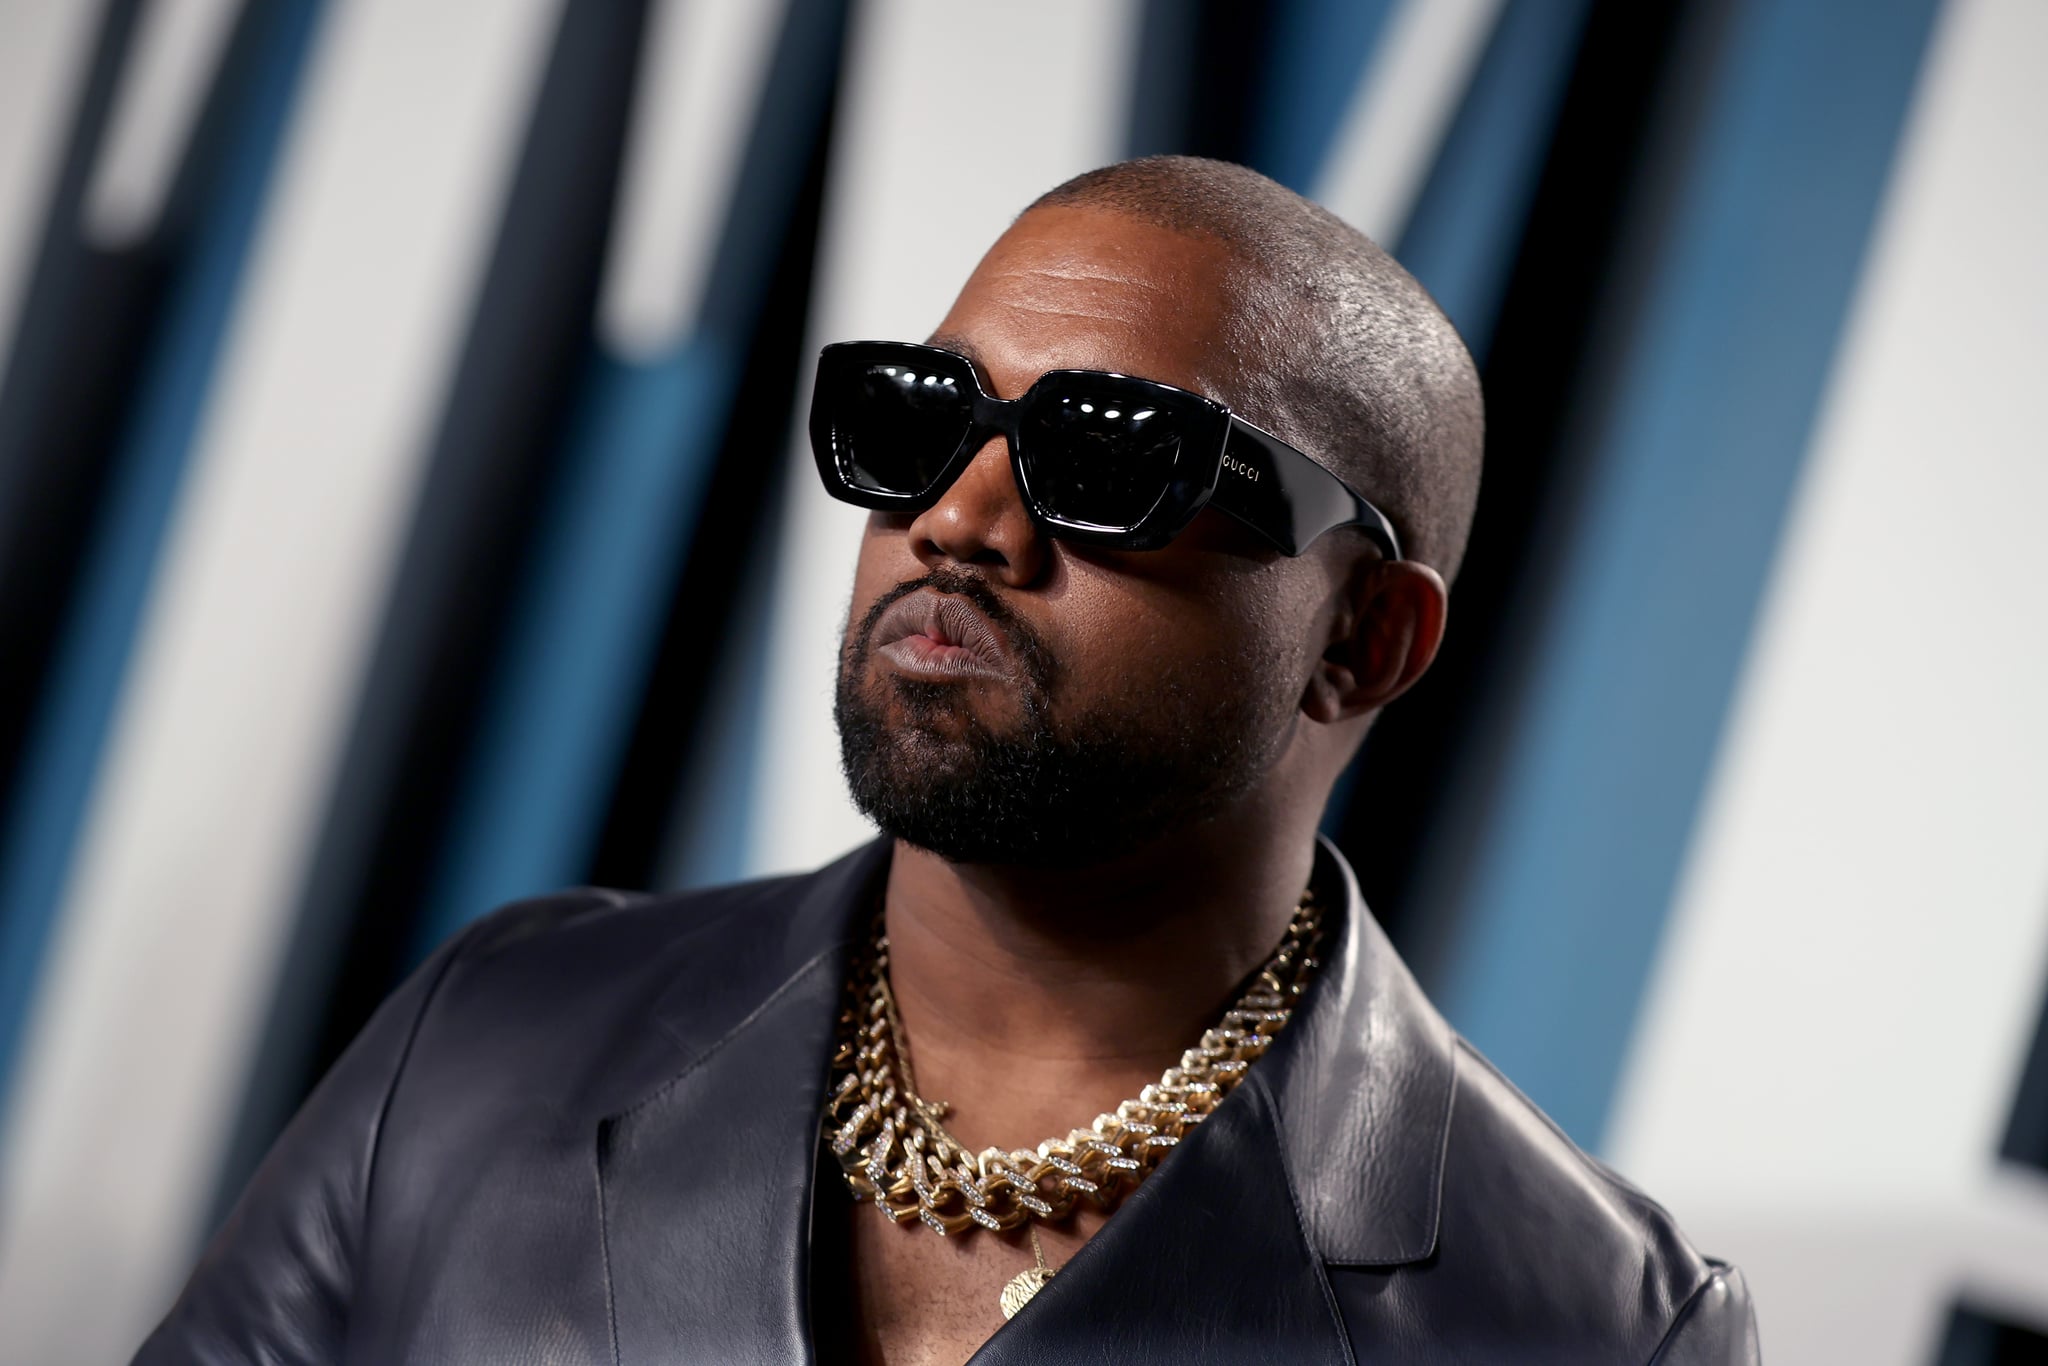 BEVERLY HILLS, CALIFORNIA - FEBRUARY 09: Kanye West attends the 2020 Vanity Fair Oscar Party hosted by Radhika Jones at Wallis Annenberg Center for the Performing Arts on February 09, 2020 in Beverly Hills, California. (Photo by Rich Fury/VF20/Getty Images for Vanity Fair)